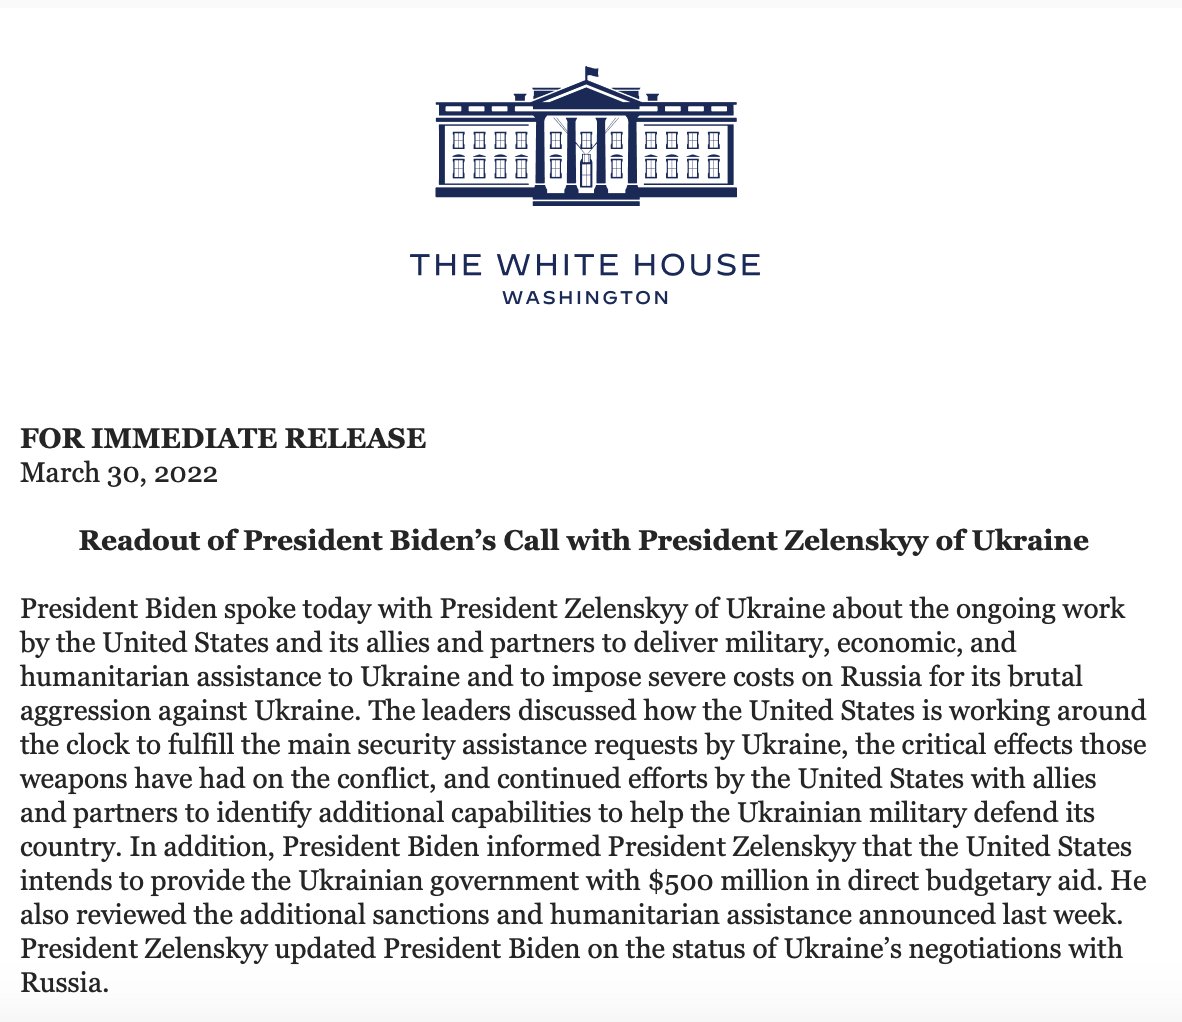 Biden informed Zelenskyy that the US intends to provide Ukraine with an additional  $500 million in aid